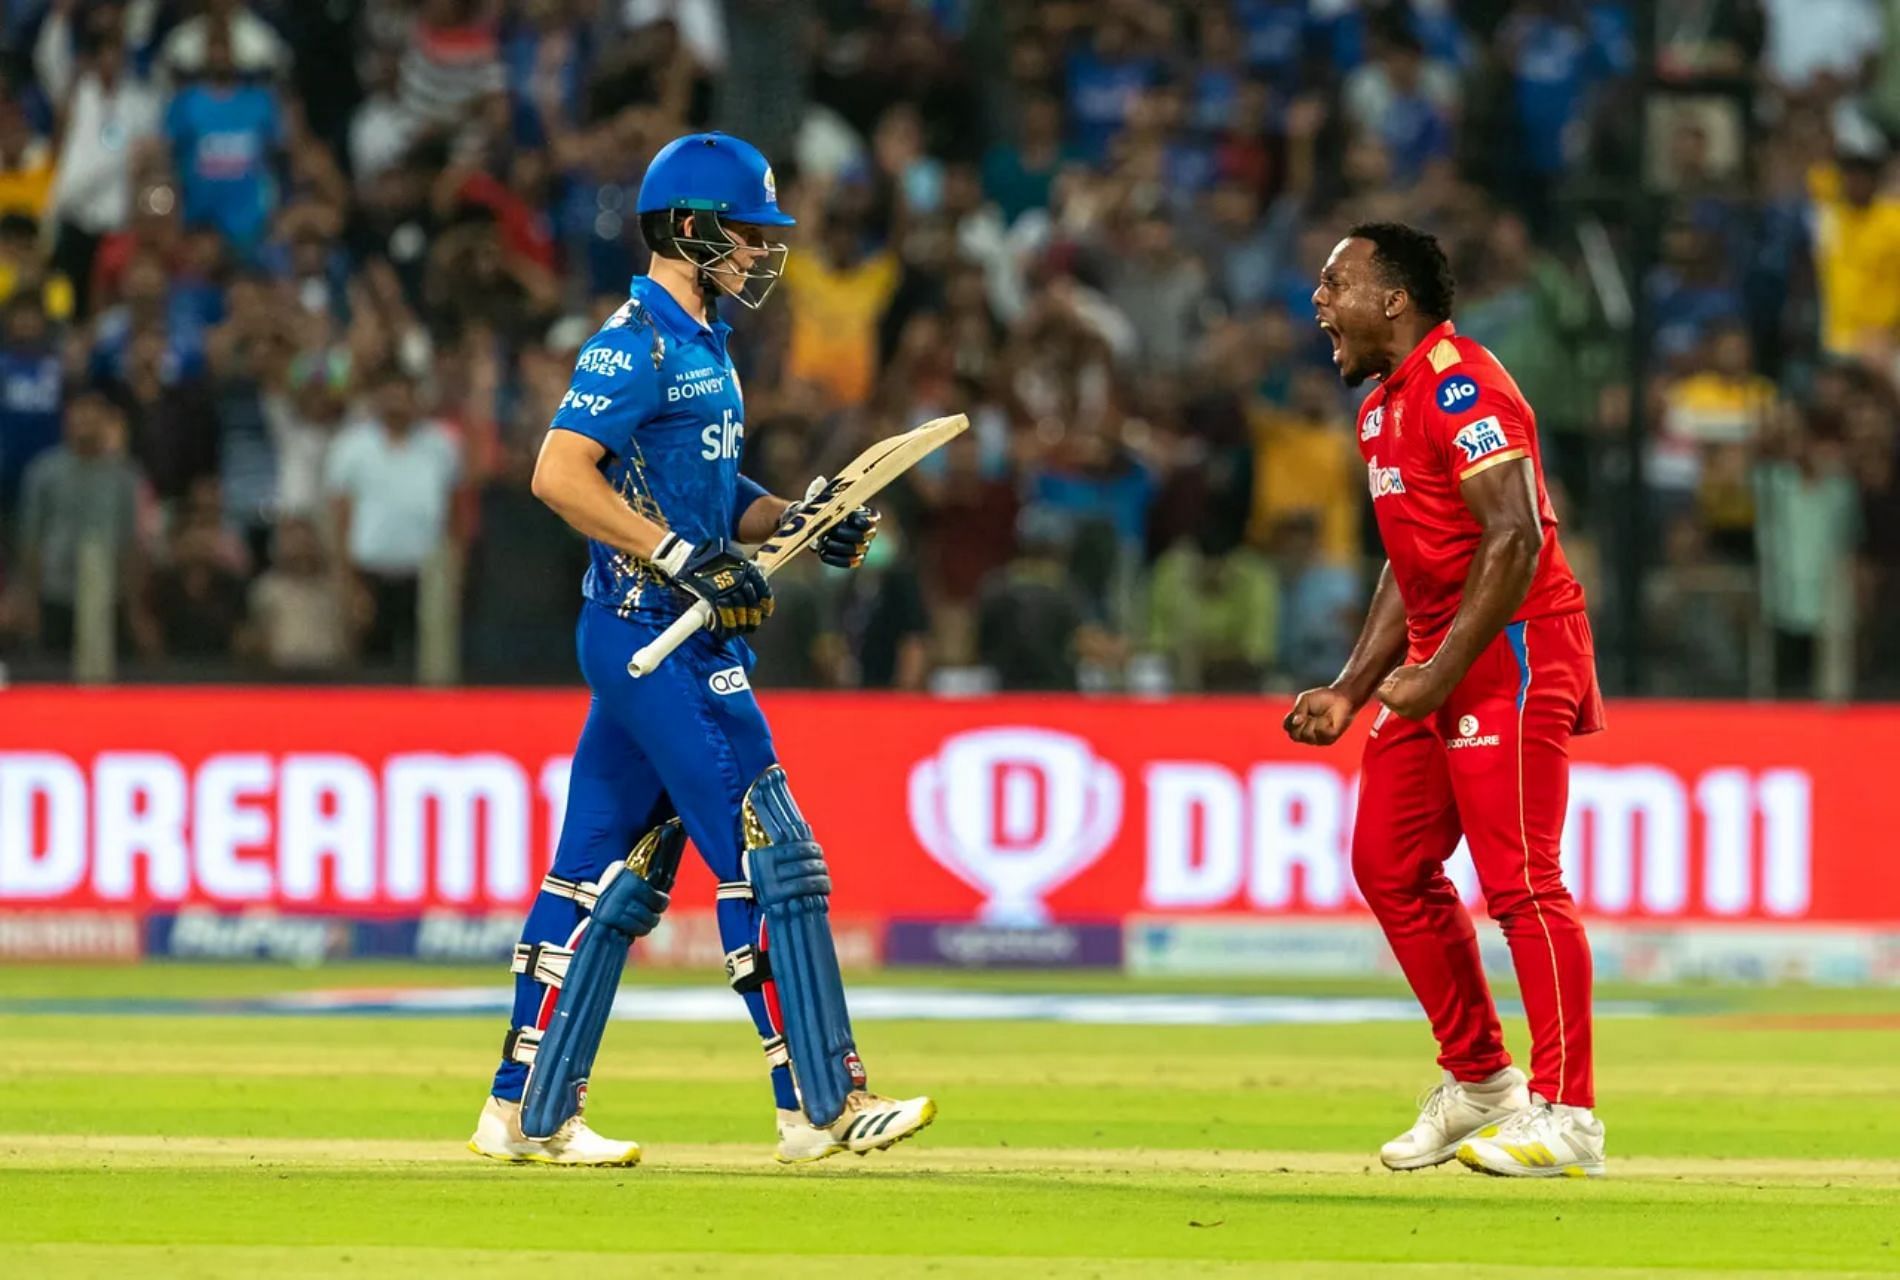 Odean Smith lets out a roar after claiming a wicket against MI. Pic: IPLT20.COM